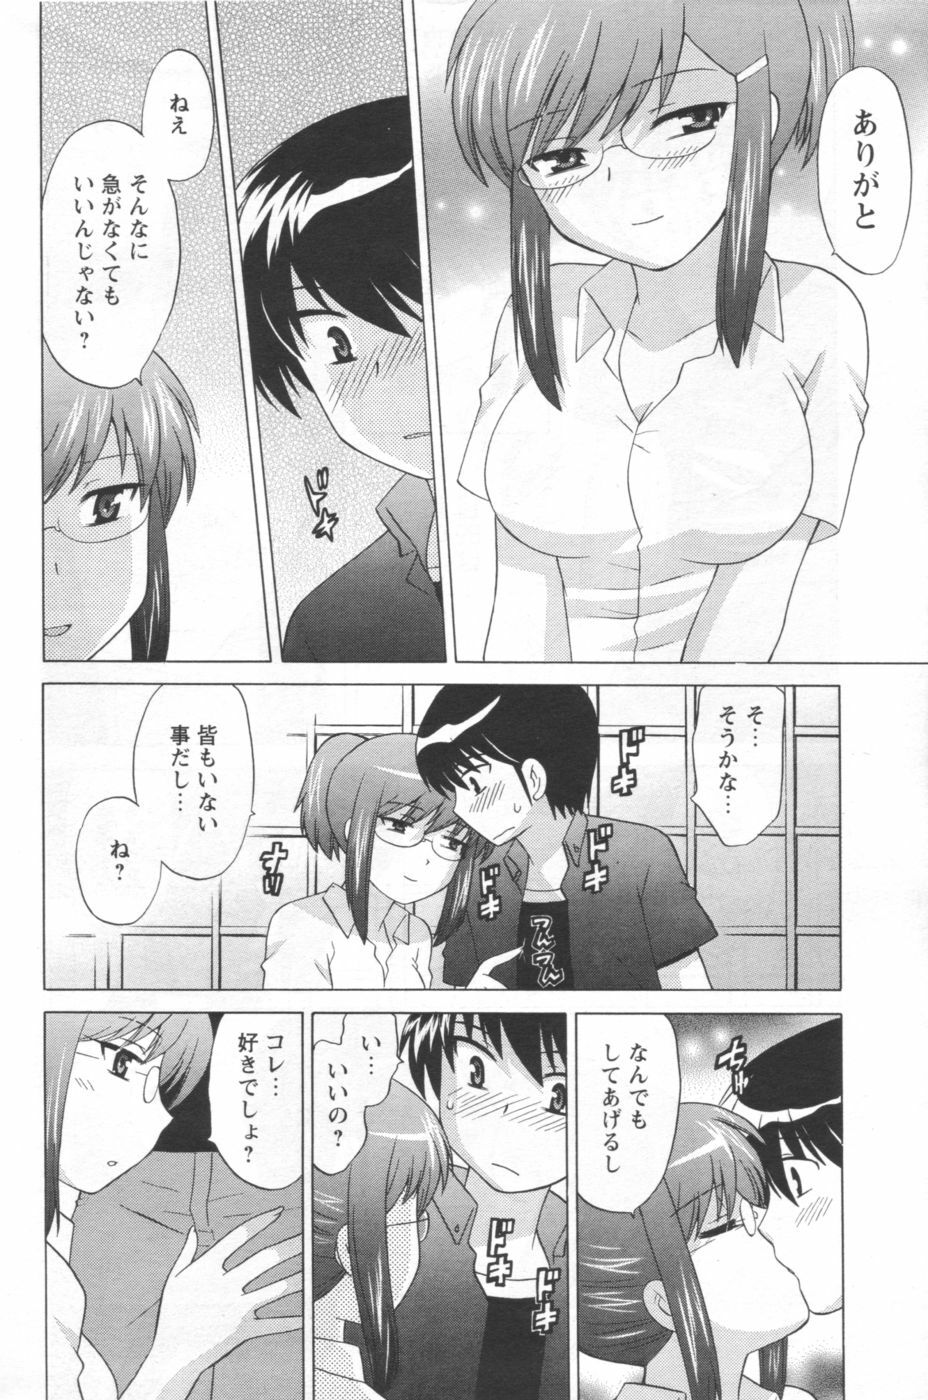 [Anthology] Men's YOUNG 2006-10 page 14 full